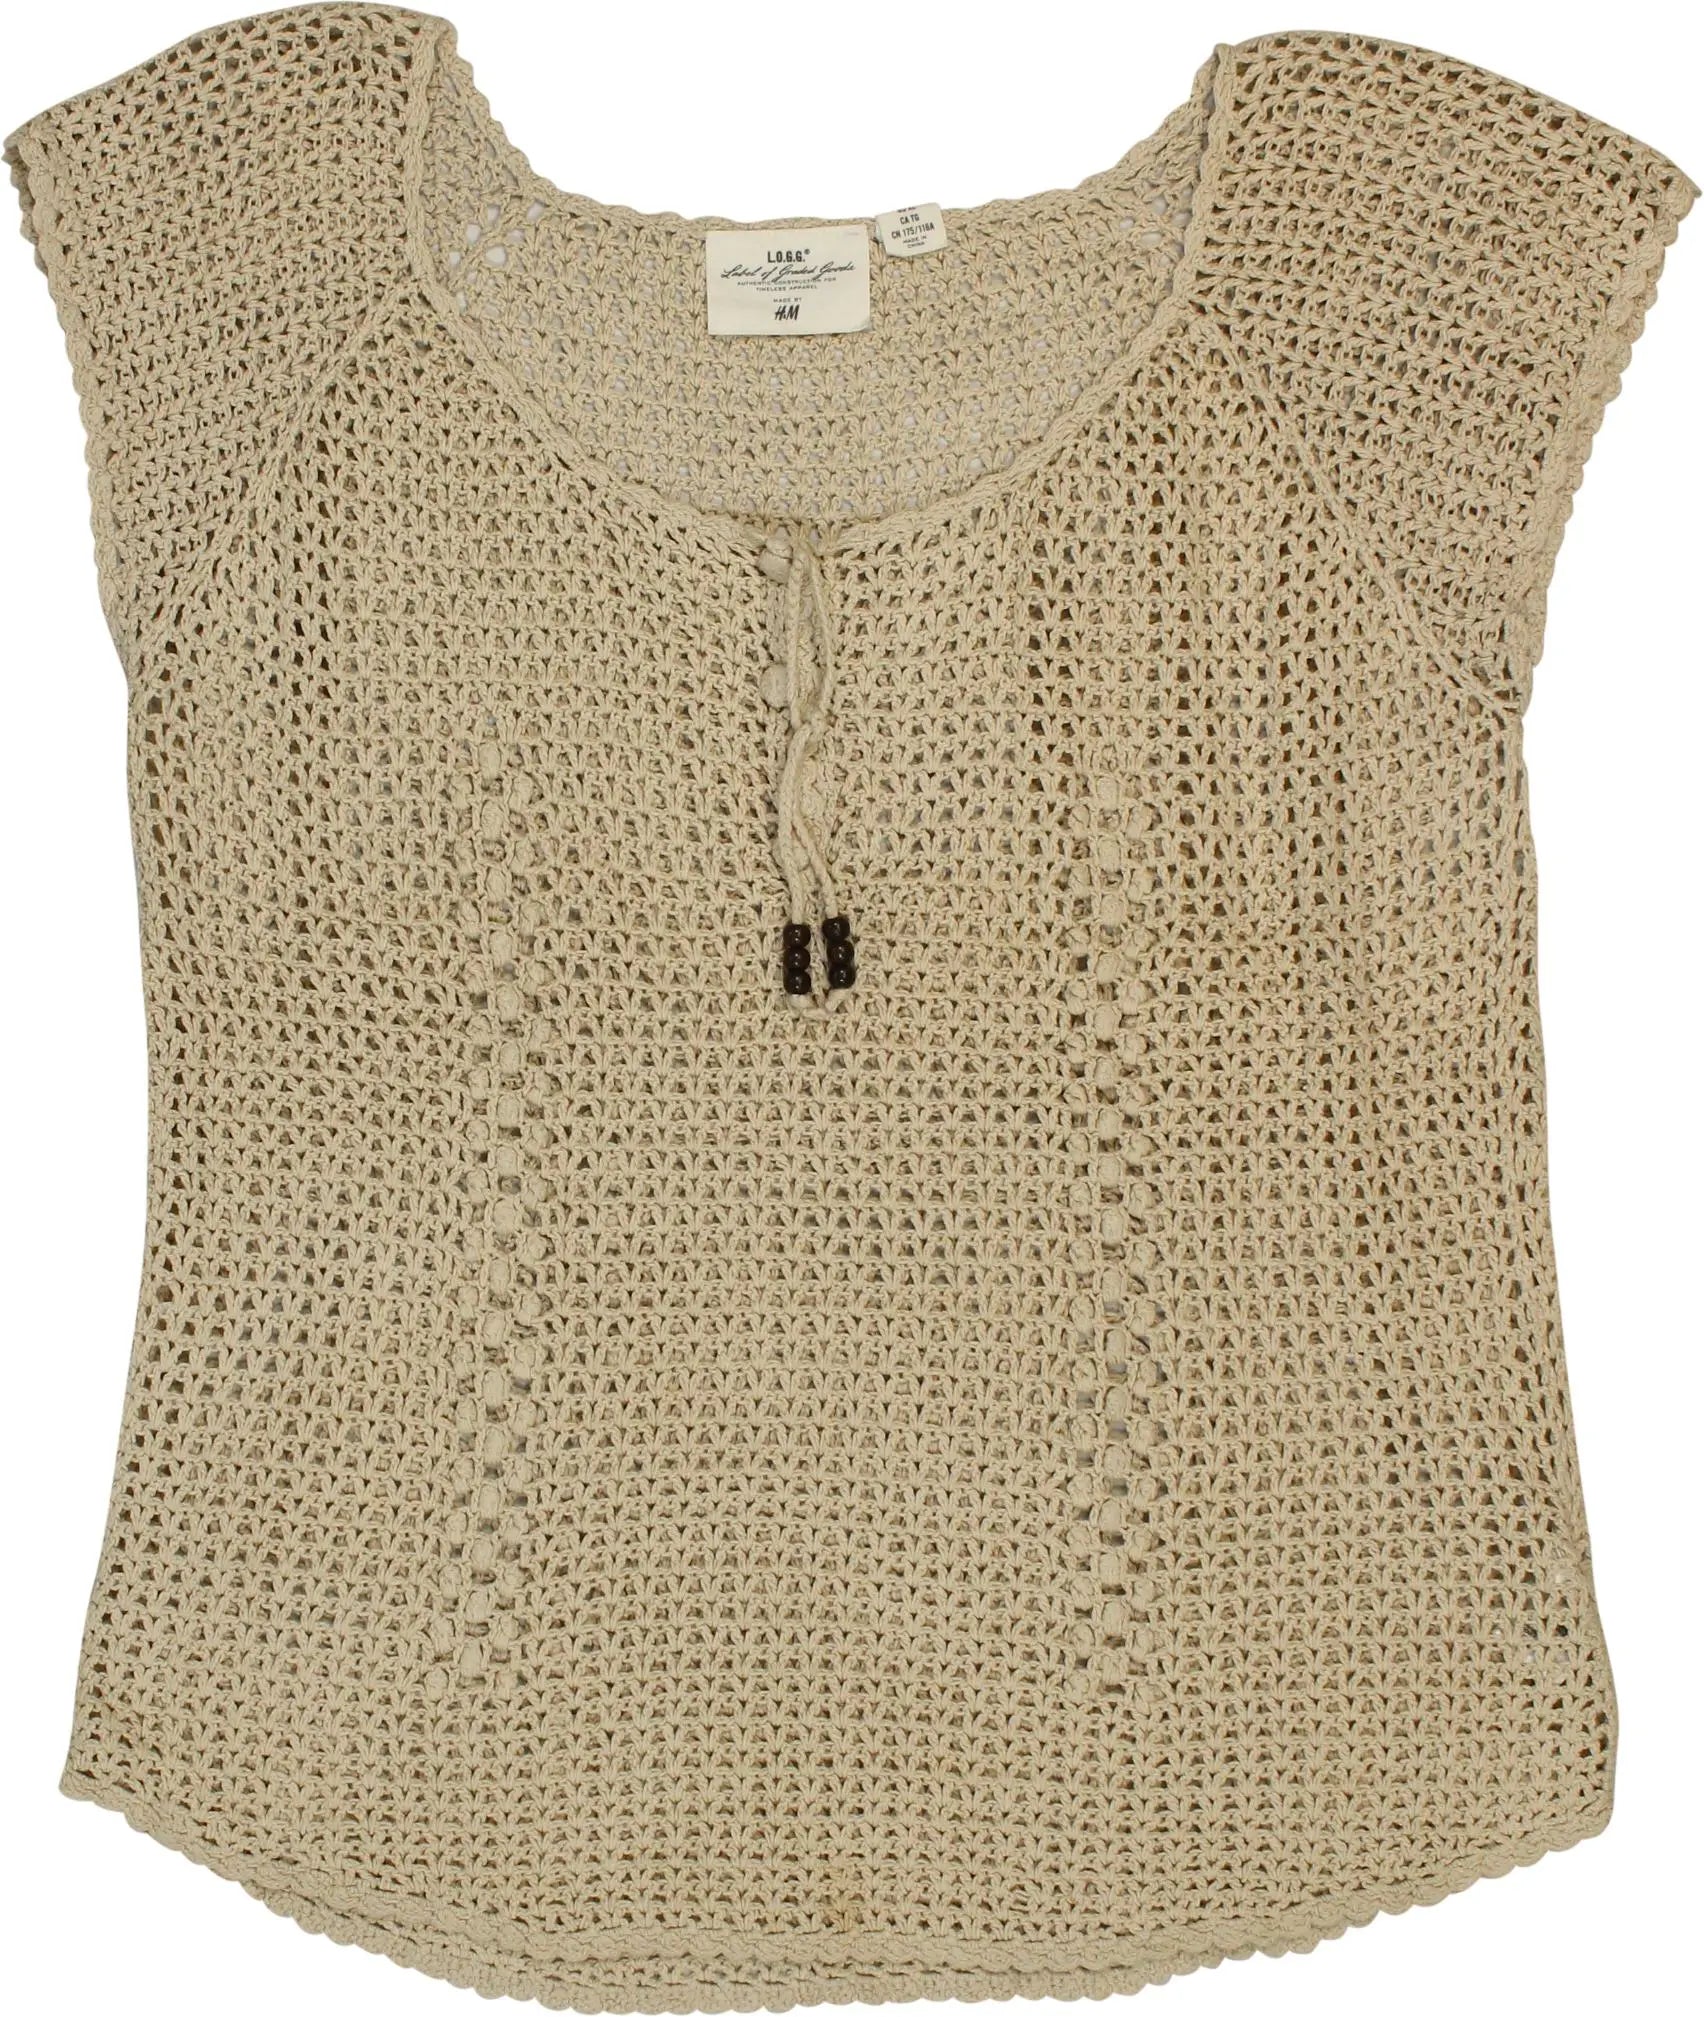 H&M - Crochet Top- ThriftTale.com - Vintage and second handclothing